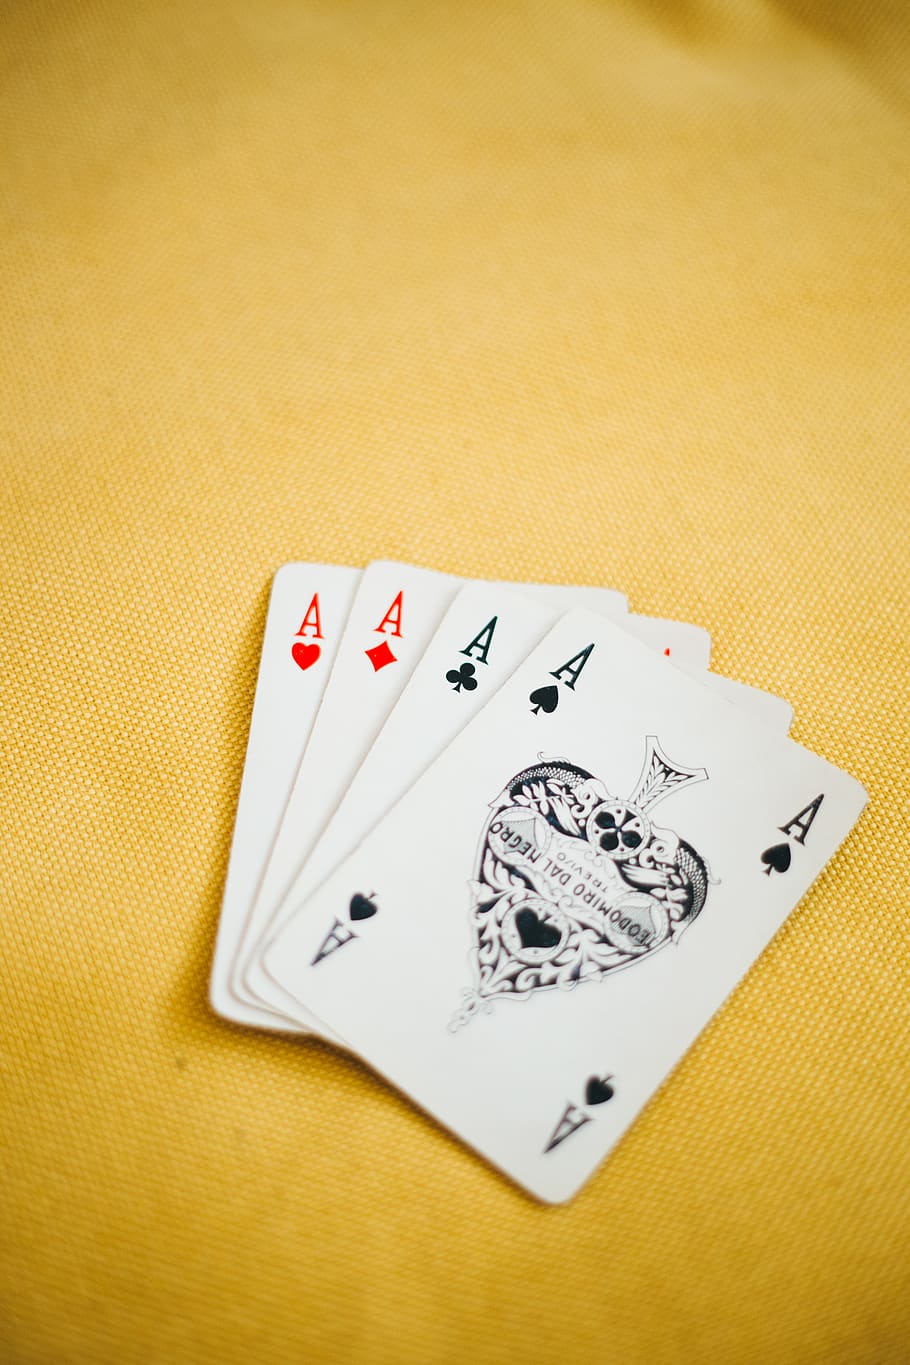 HD Wallpaper Ace Playing Cards On Brown Textile Card Game